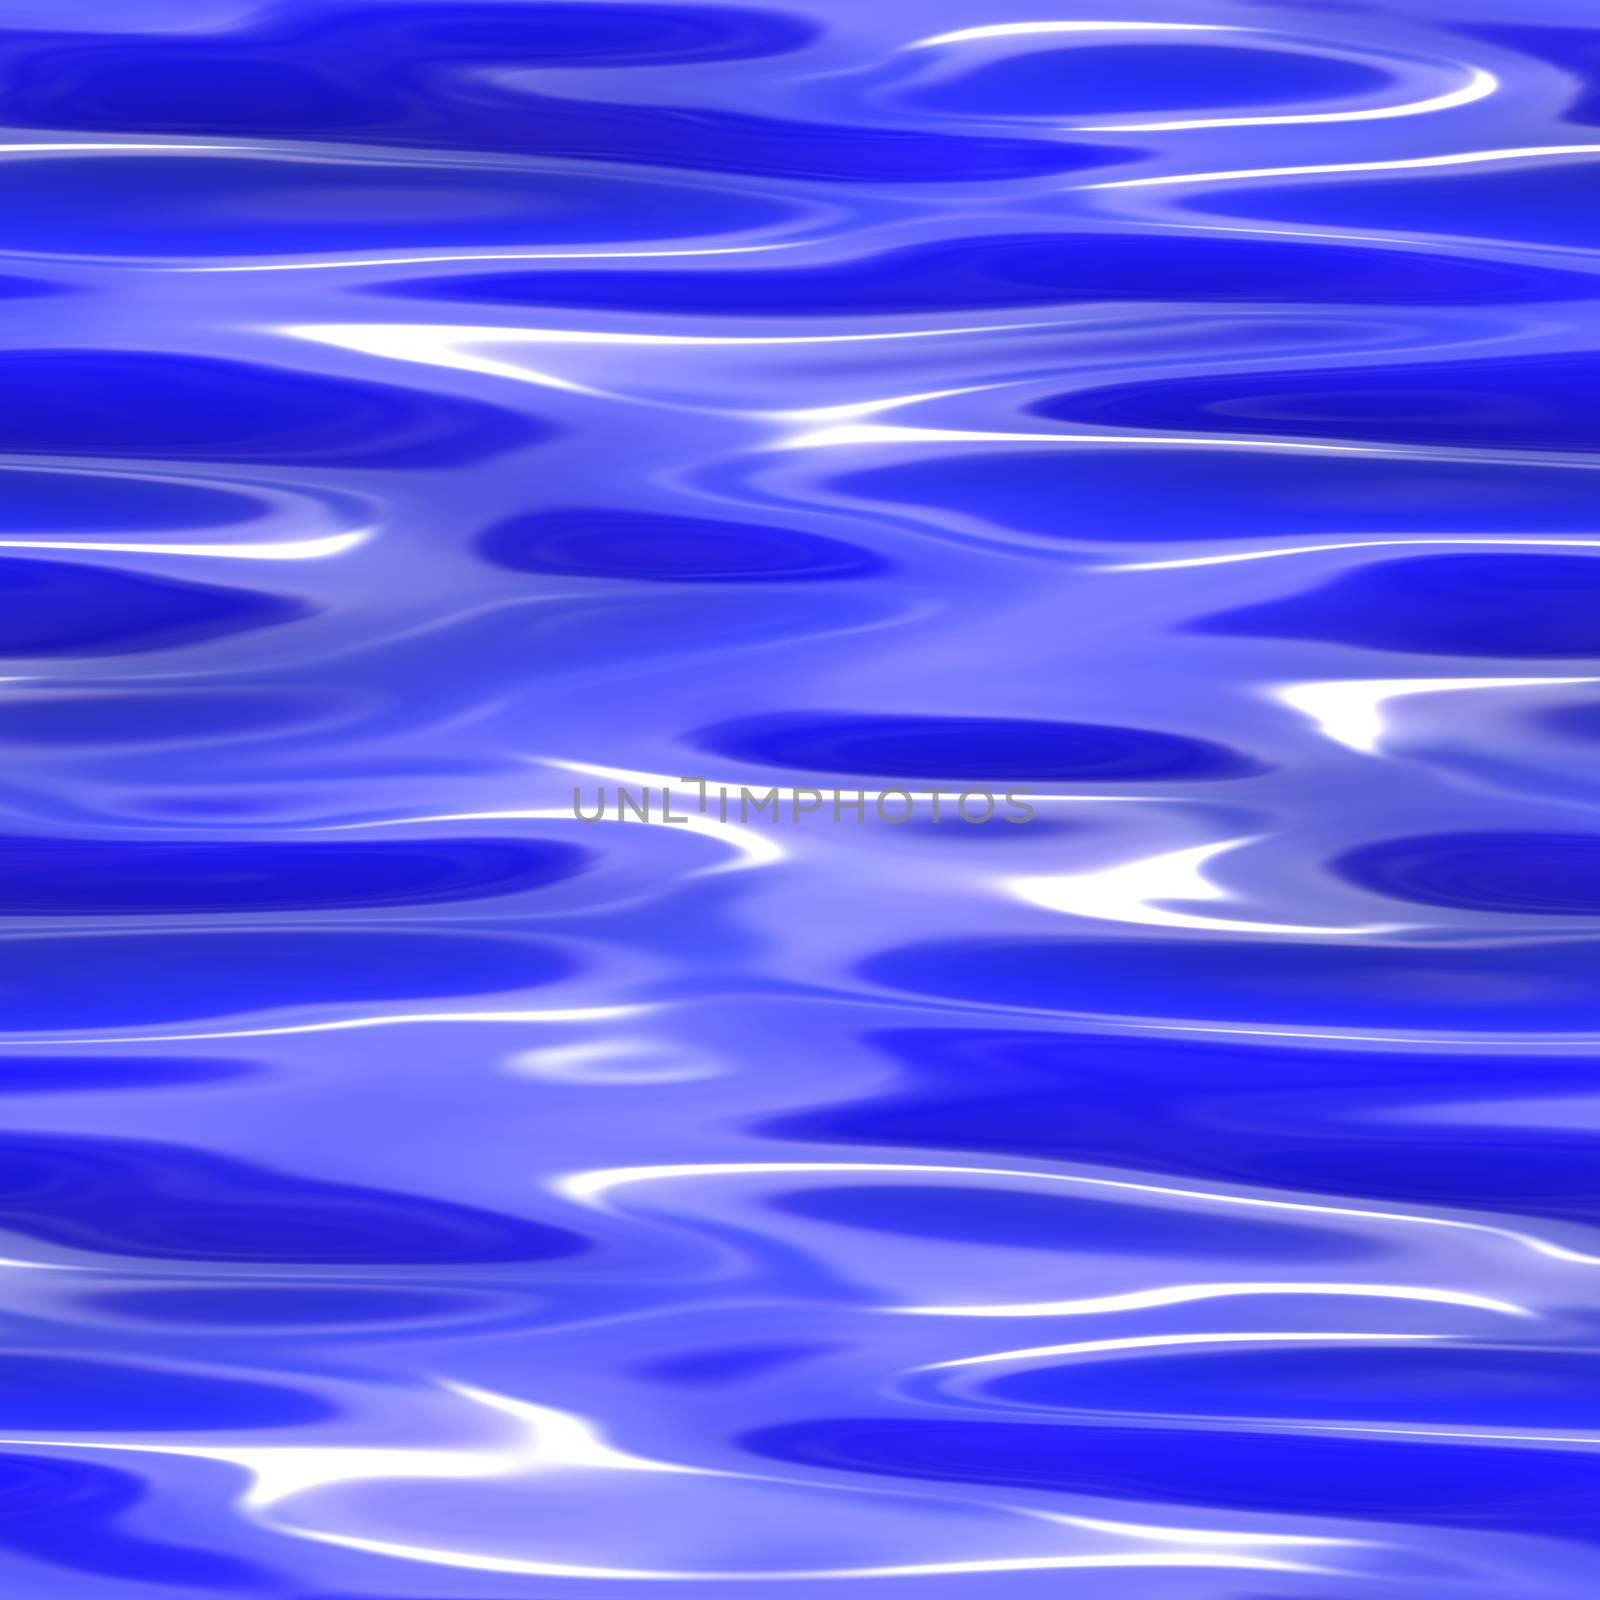 Blue wavy water surface with seamless pattern.